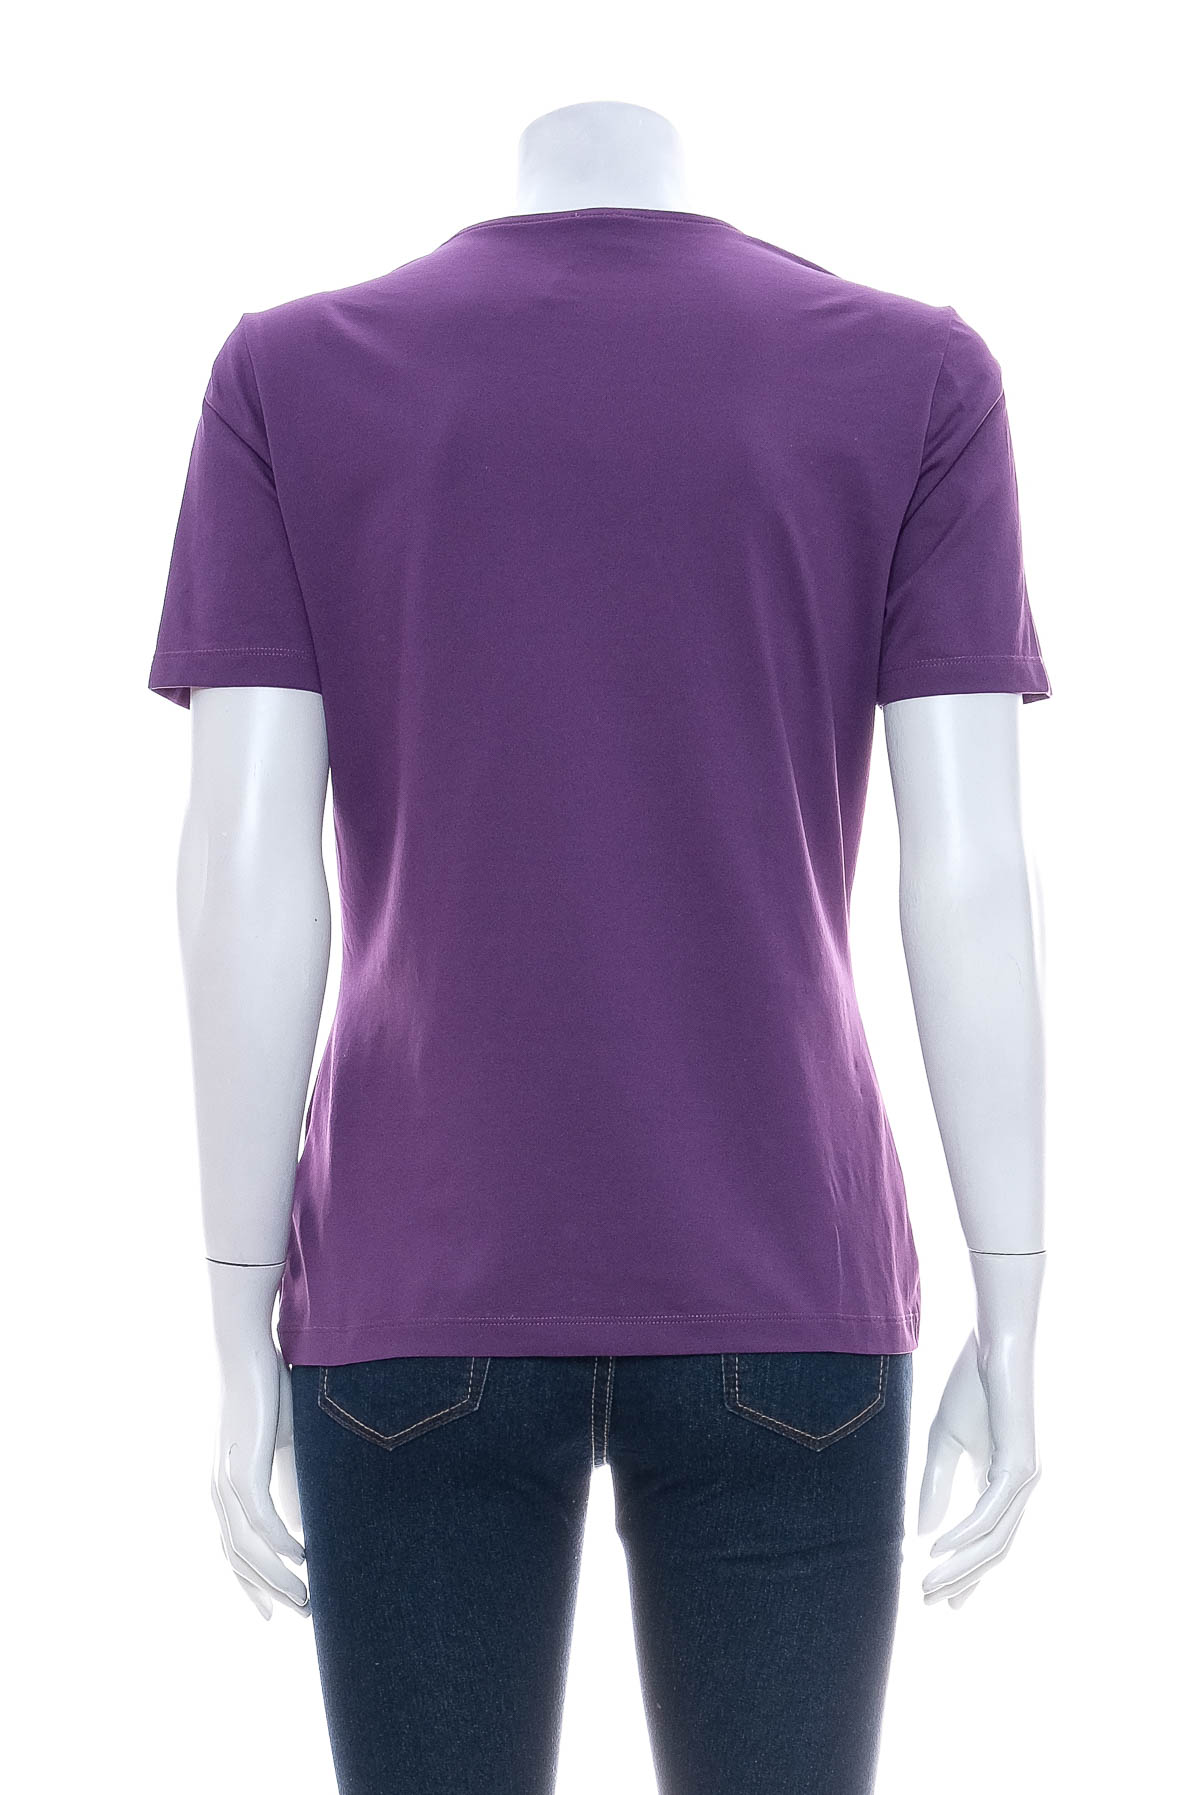 Women's t-shirt - SELECTION by S.Oliver - 1